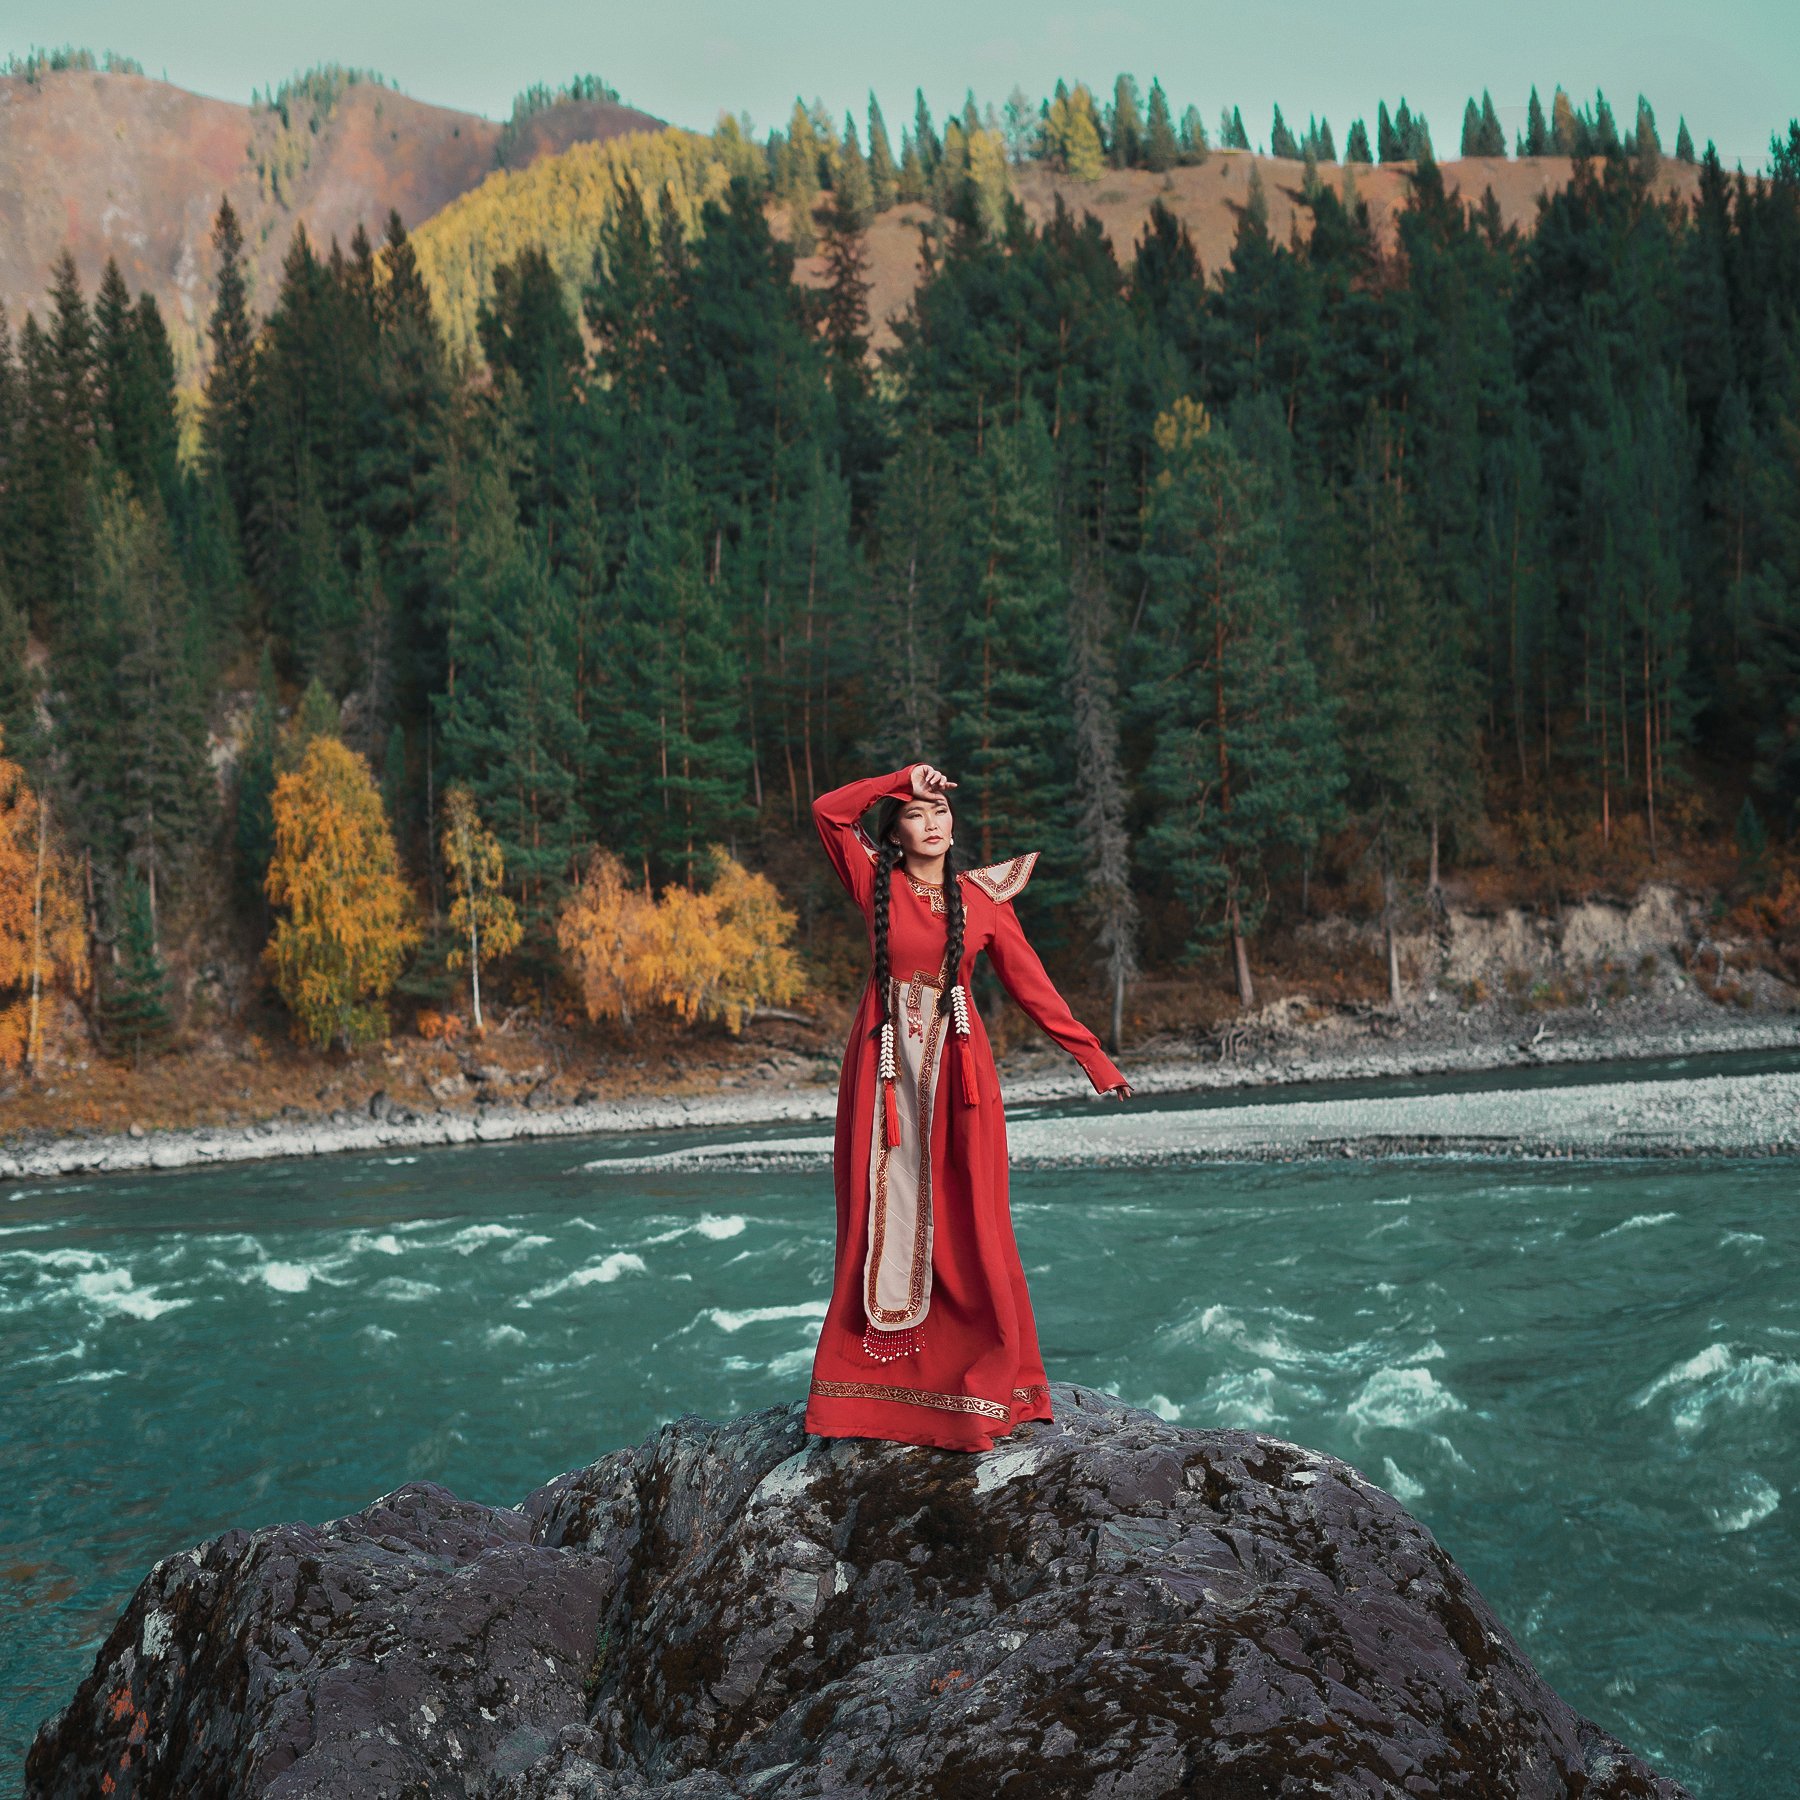 altay, national, traditional, forest, river, Siberia, mountains,girl, red, costume, Екатерина Кулакова